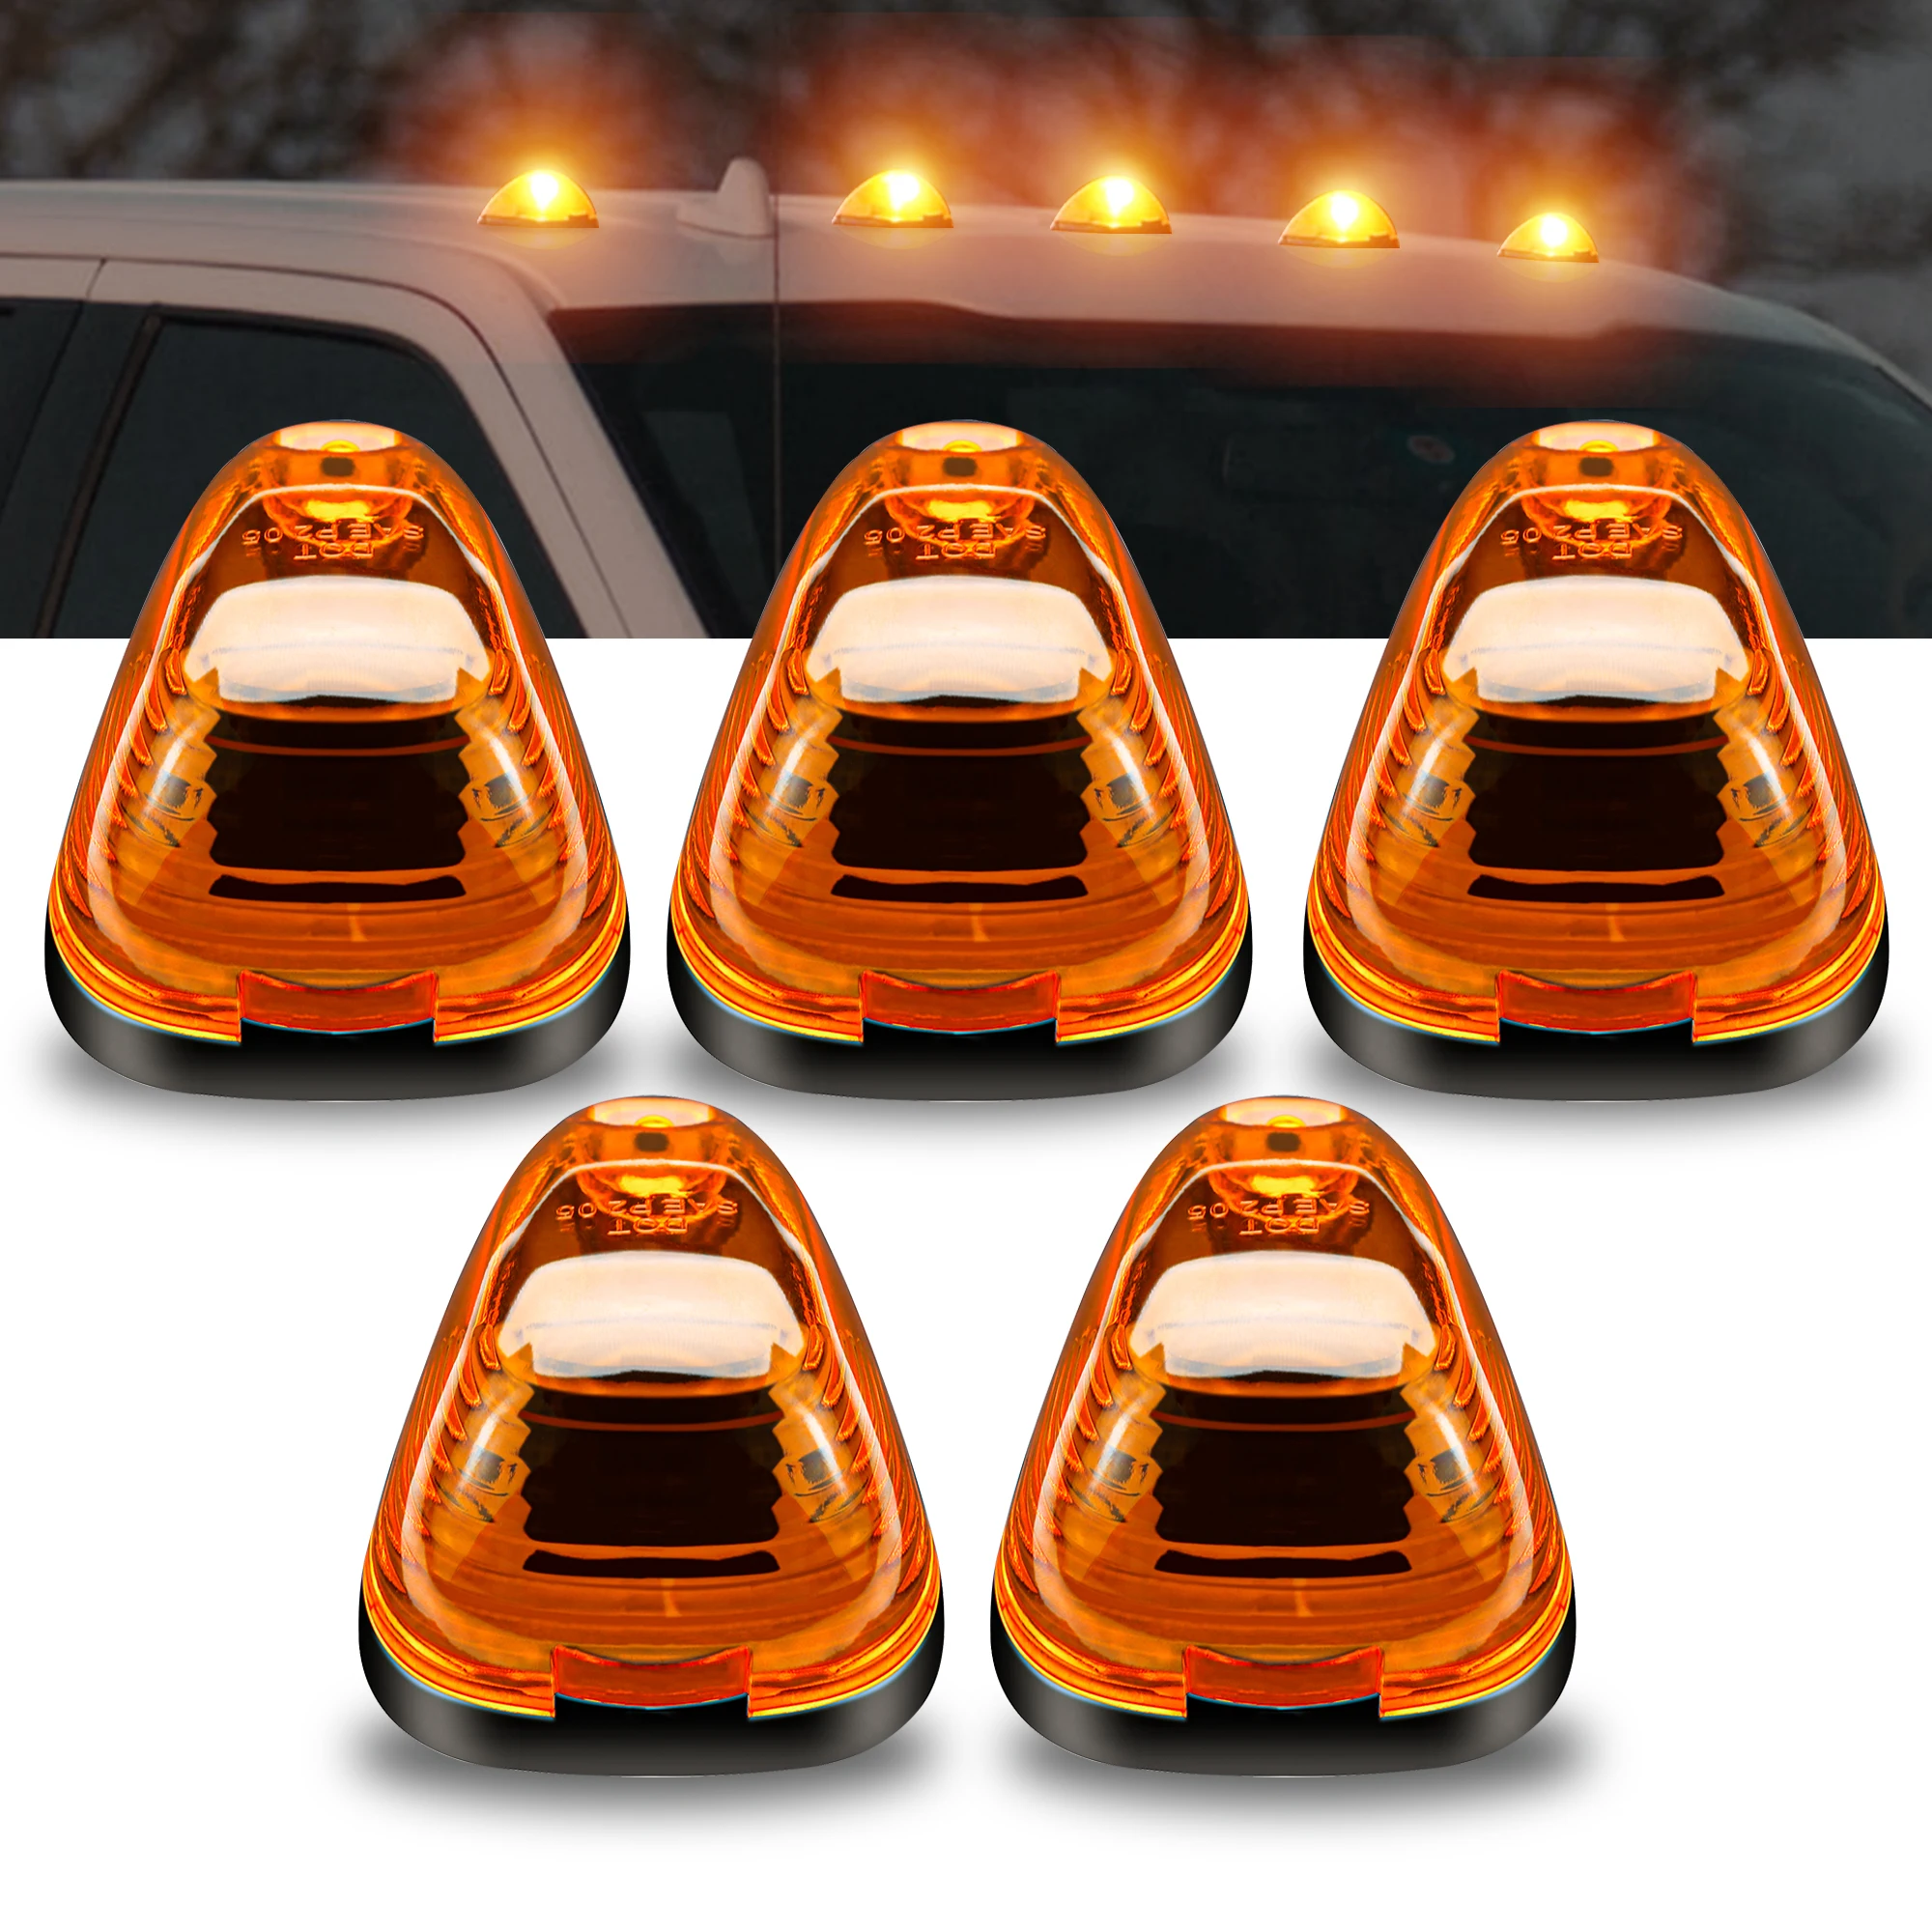 

5PCS Cab Roof Marker Lights 10LED Amber Top Clearance Running Lights Compatible with Ford 1999-2016 Super Duty Pickup Trucks SUV